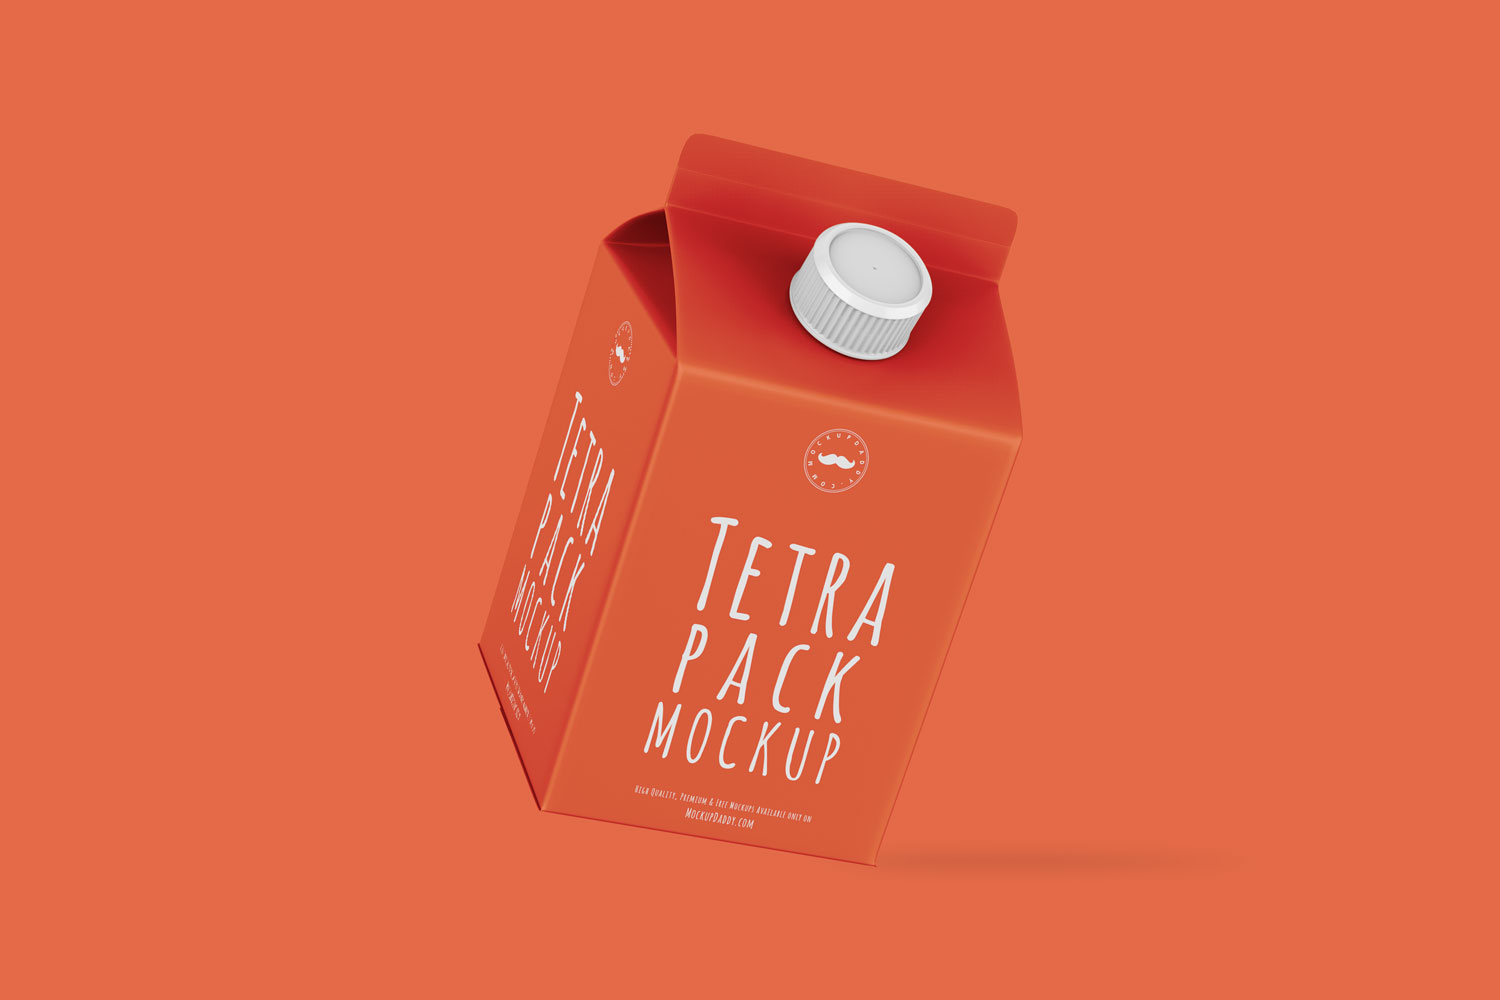 Small Red Floating Tetra Pack Mockup on red background